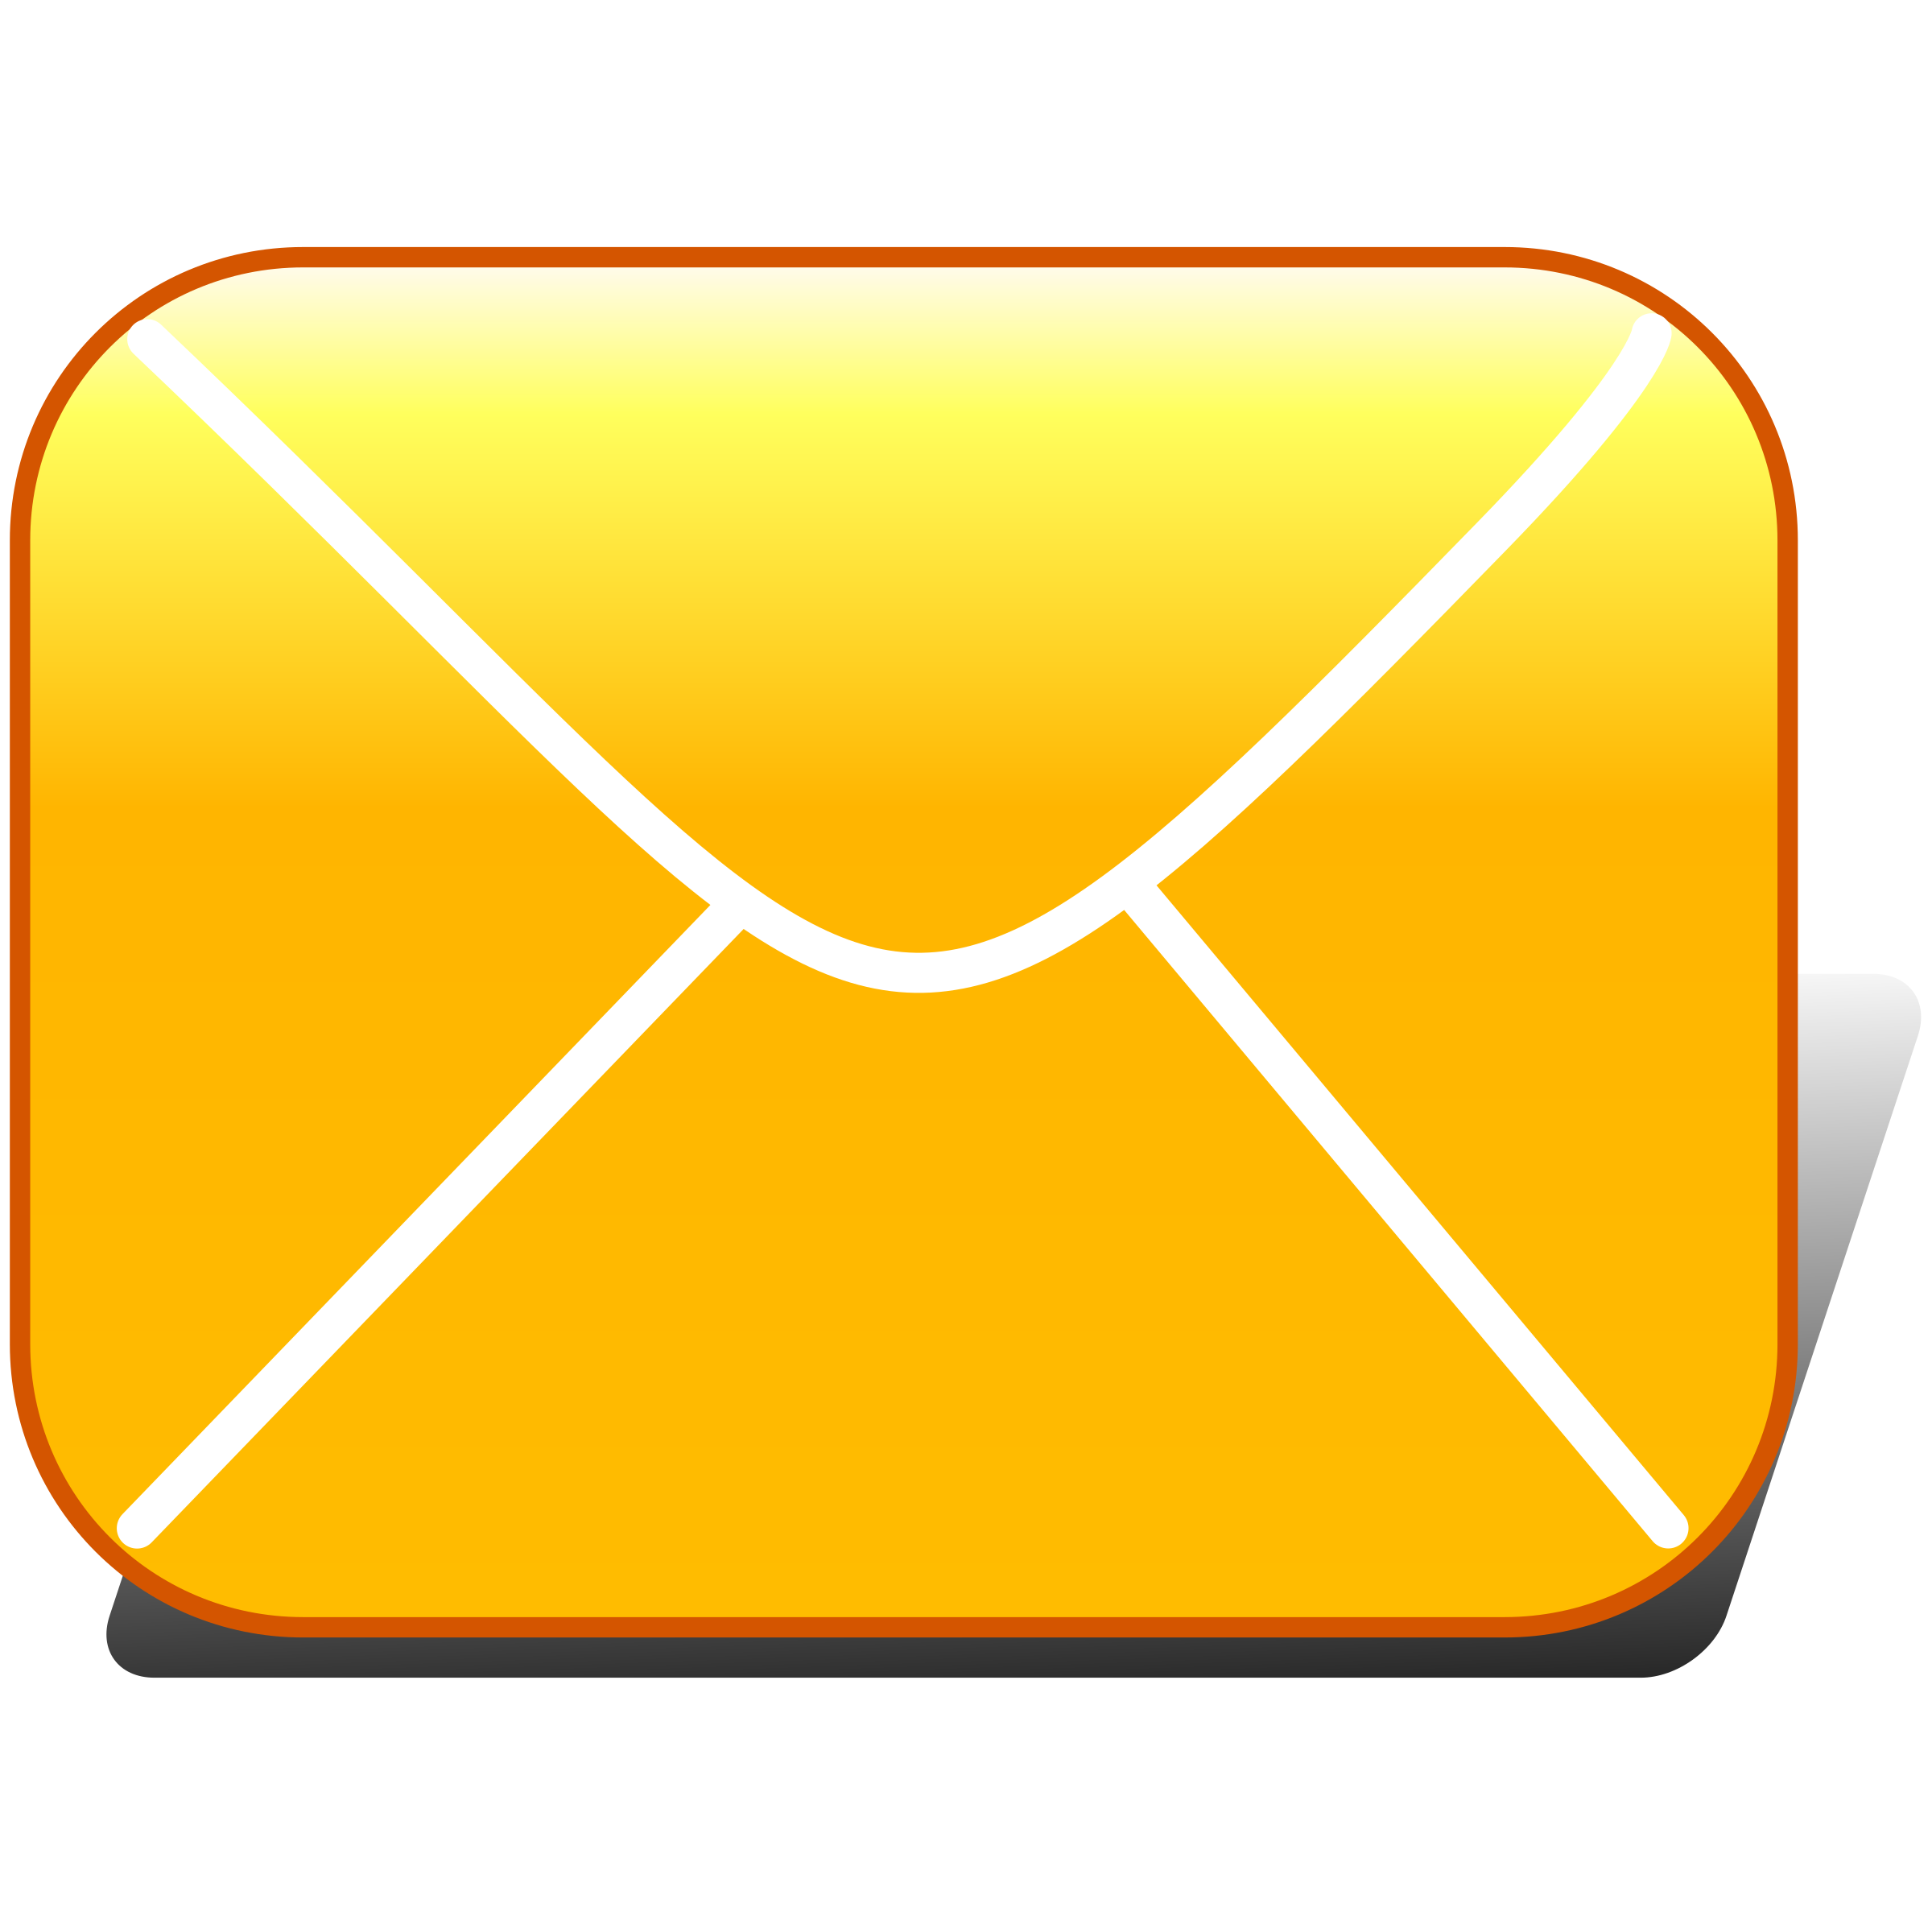 E big image png. Email clipart mail icon